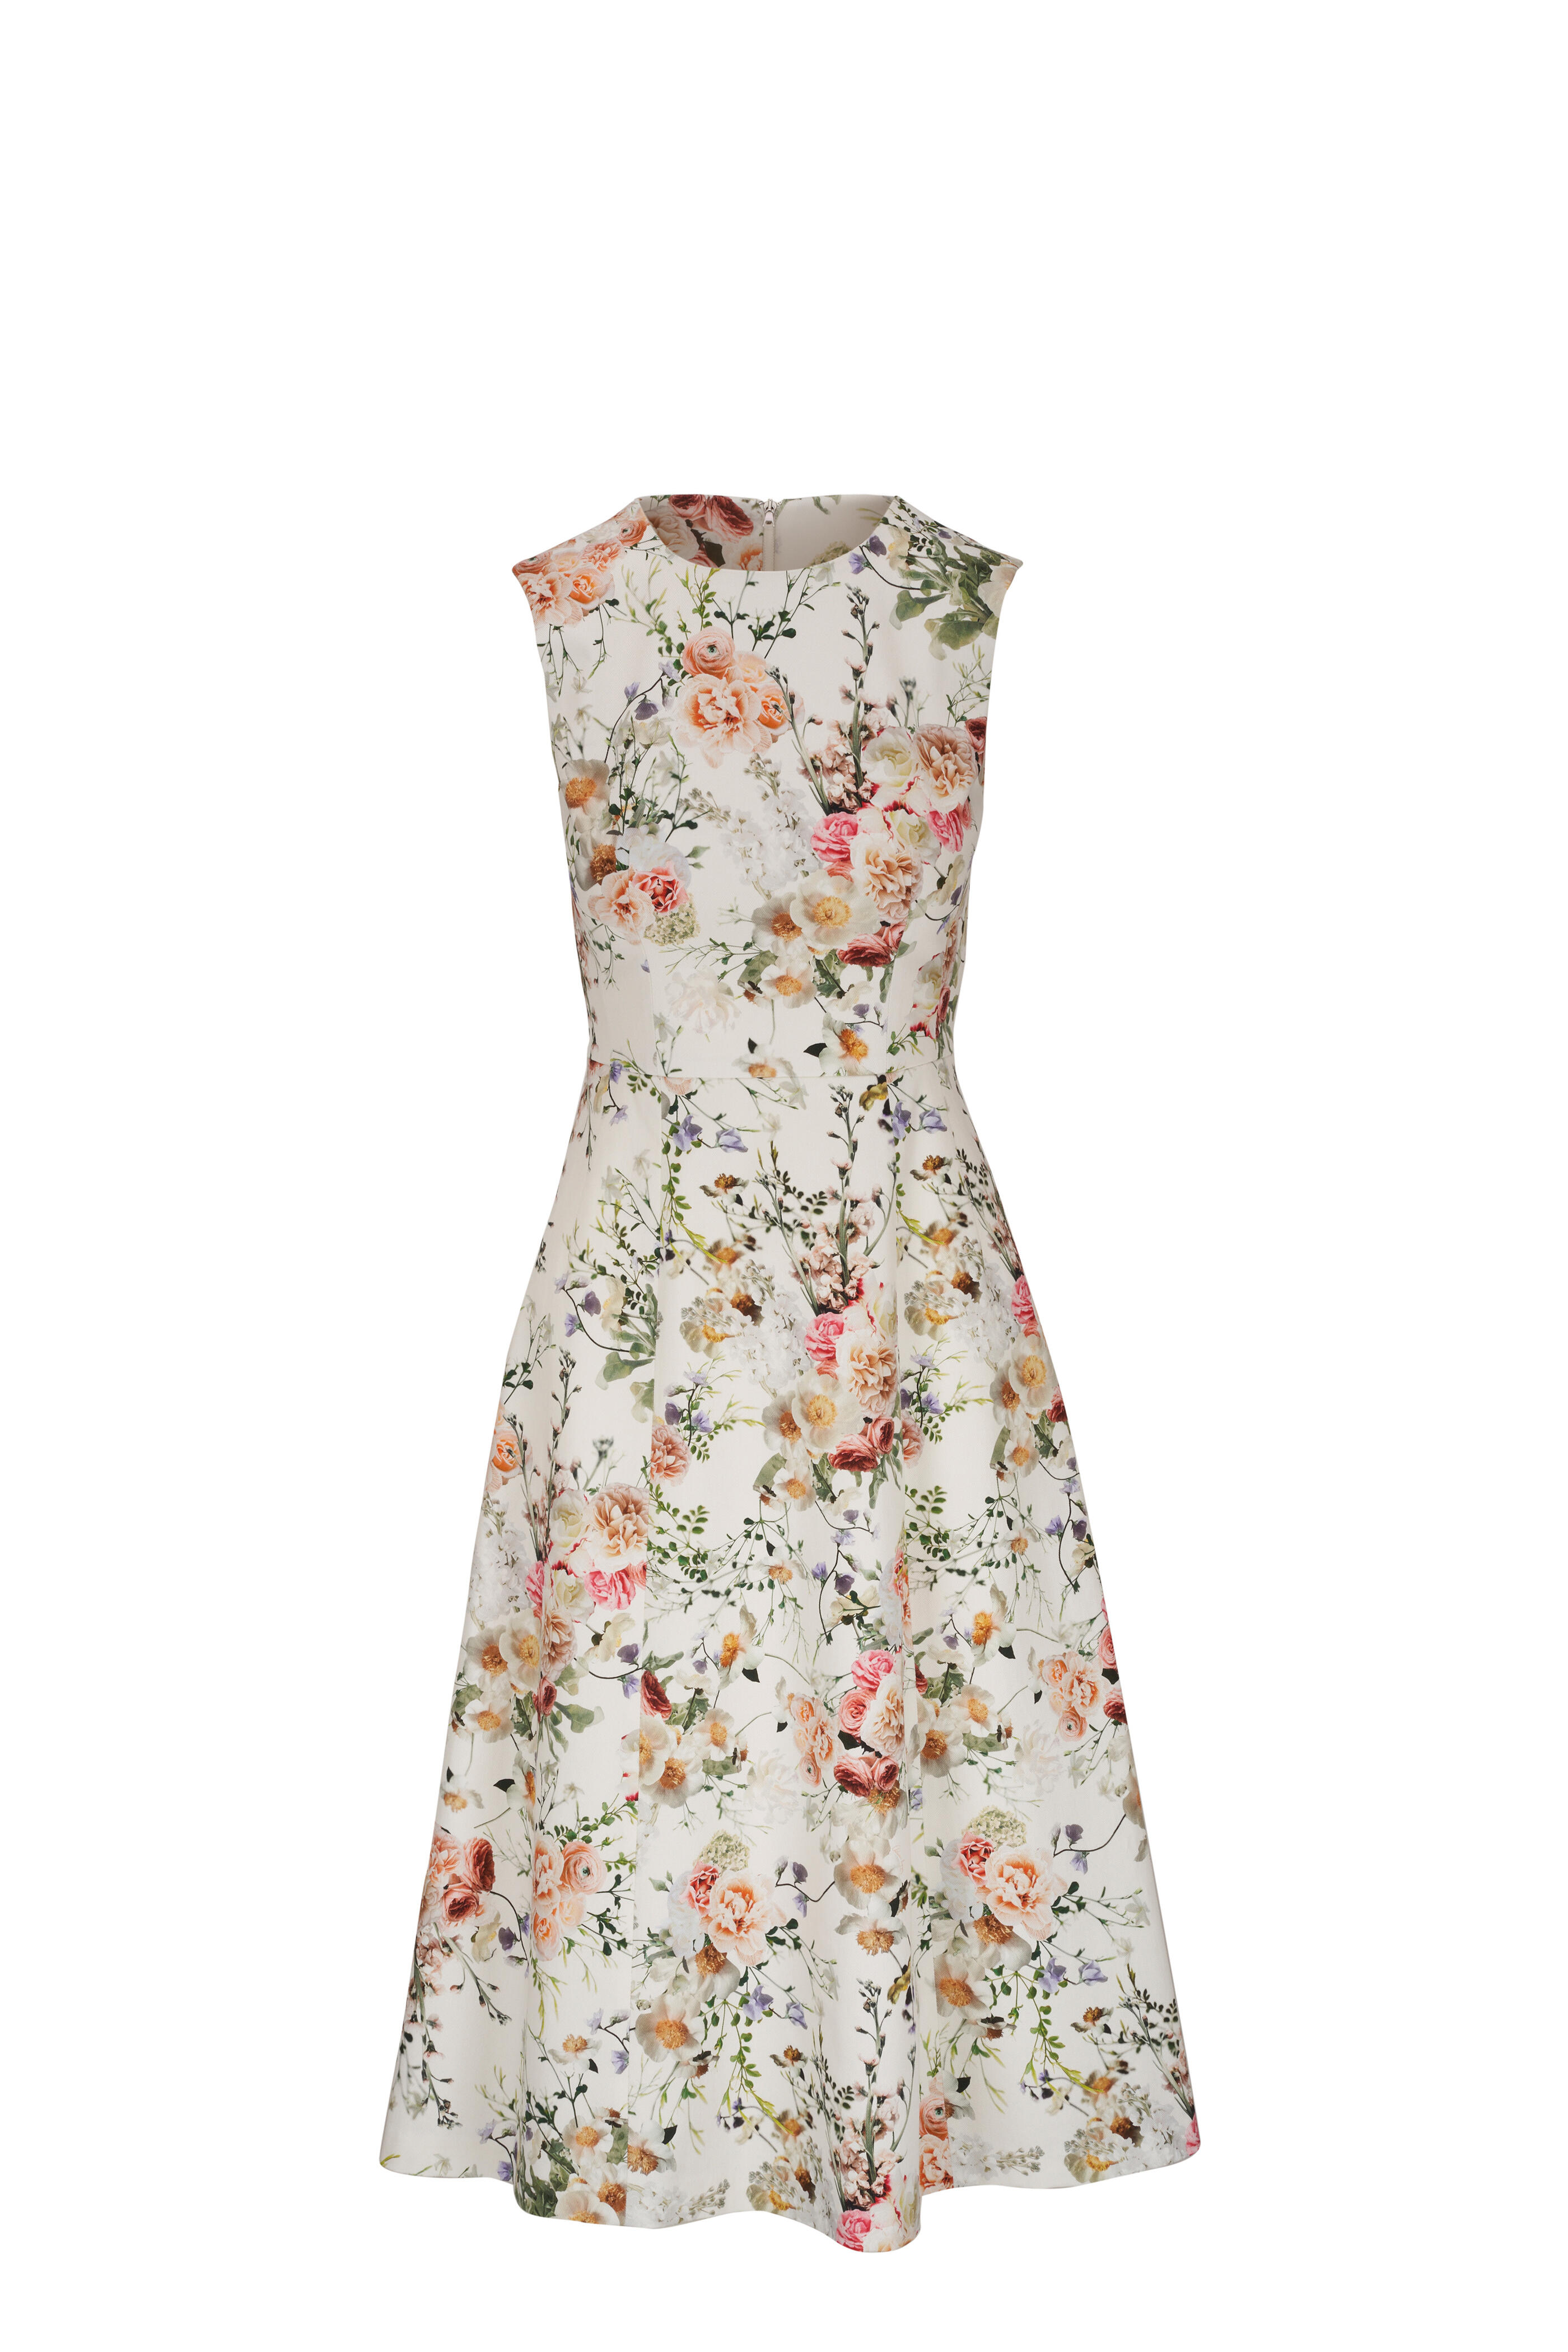 Adam Lippes - Eloise White Floral Printed Cotton Twill Dress